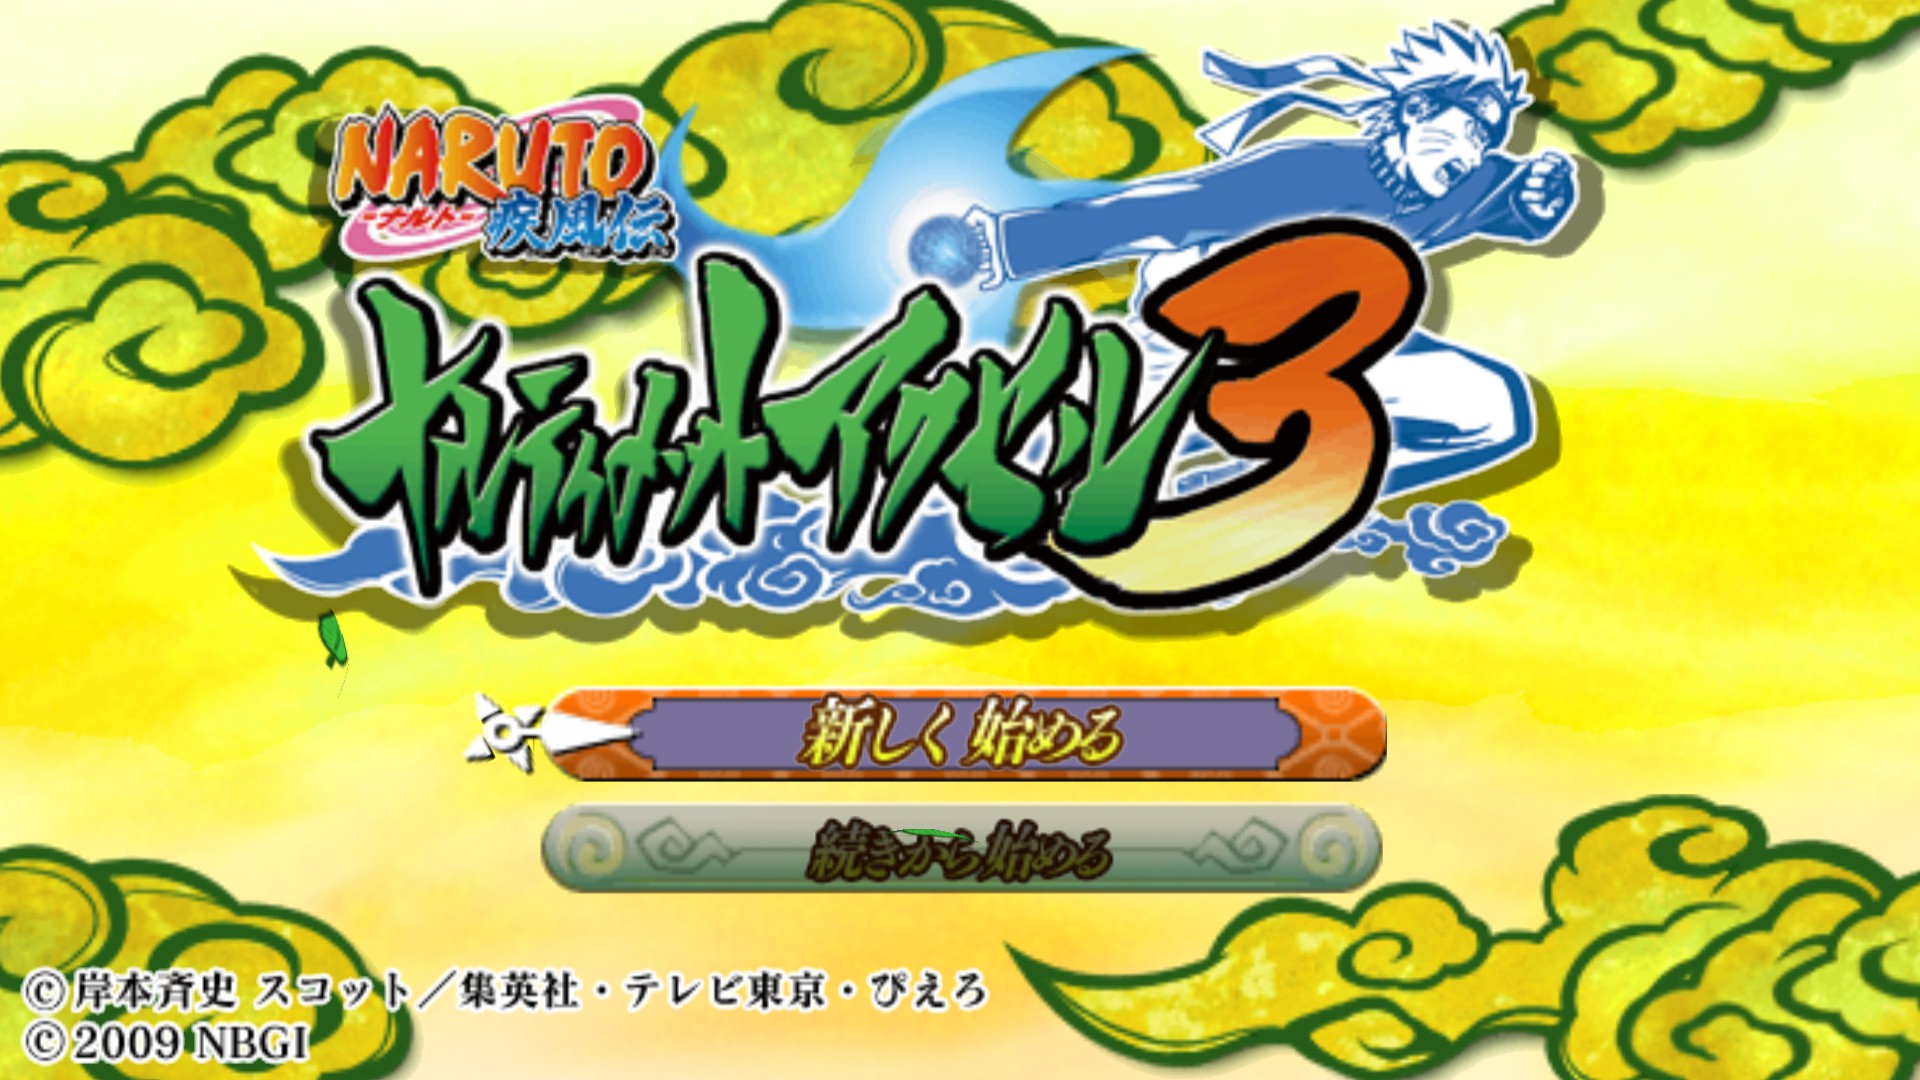 download game ppsspp naruto ultimate ninja heroes 3 usa iso compressed